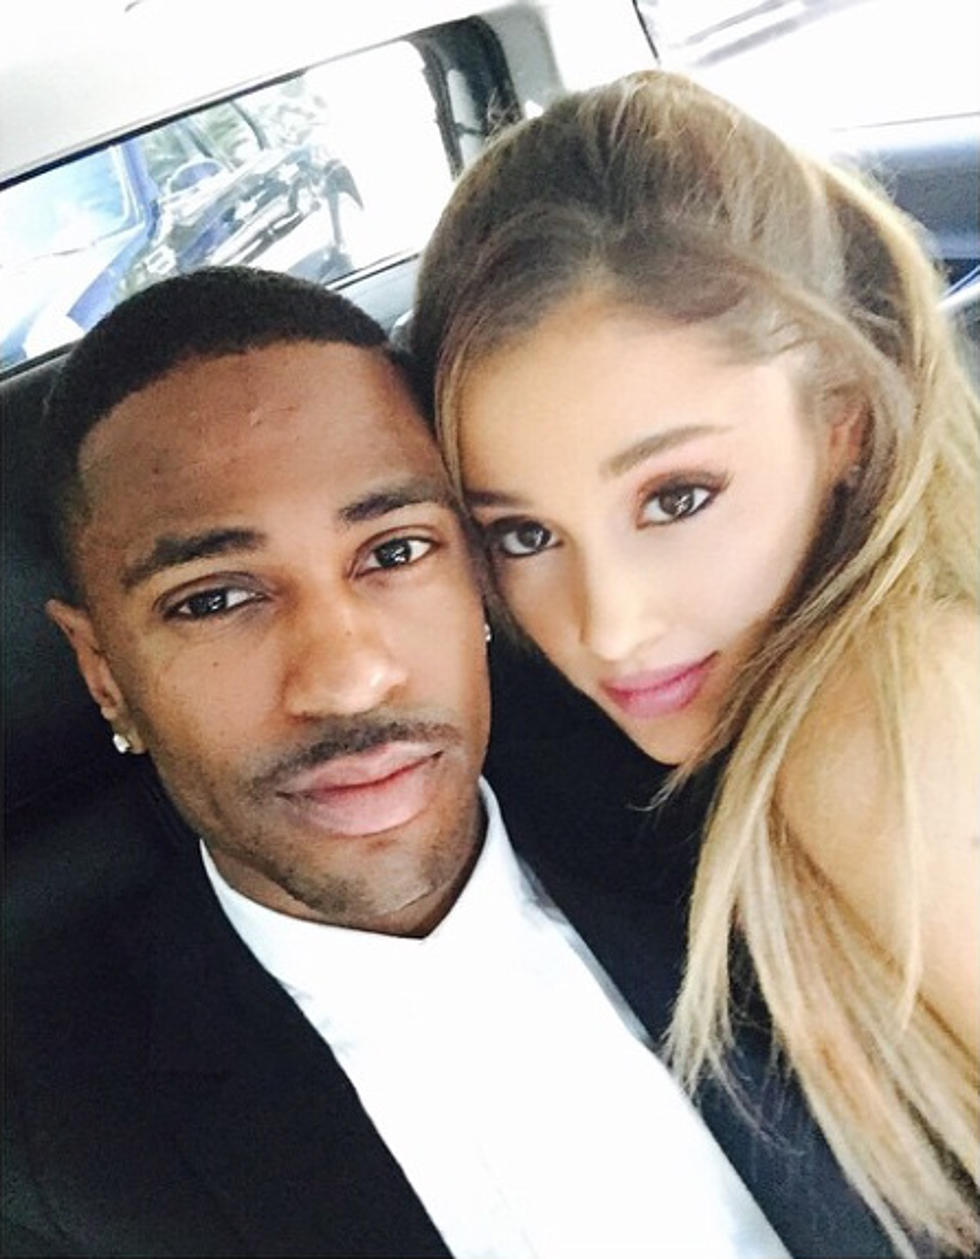 Big Sean And Ariana Grande Post First Instagram Photo As A Couple